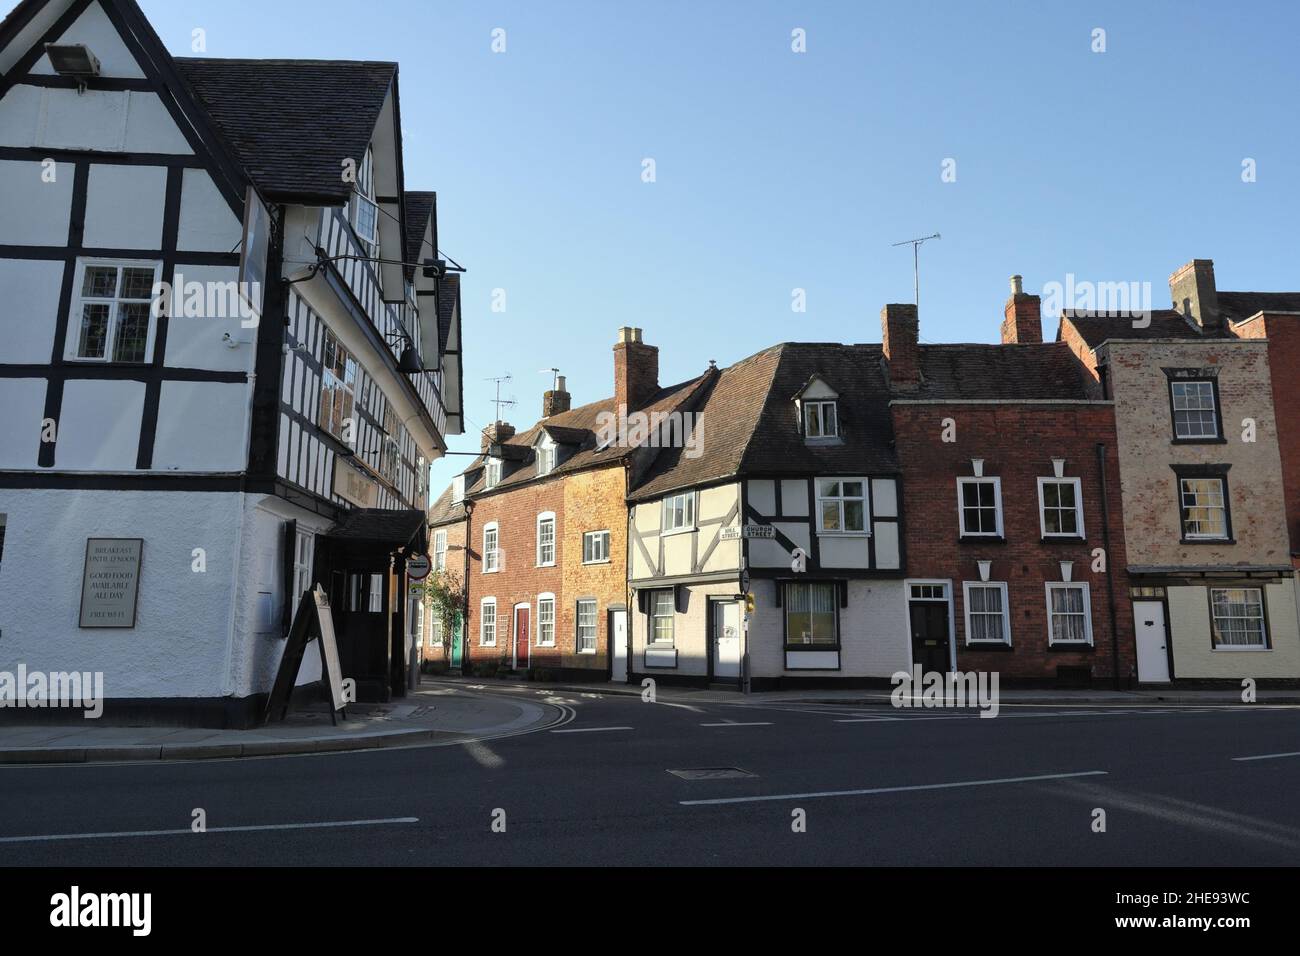 The Bell Hotel in Tewkesbury, Gloucestershire. England, English town Building built 1696 Stock Photo